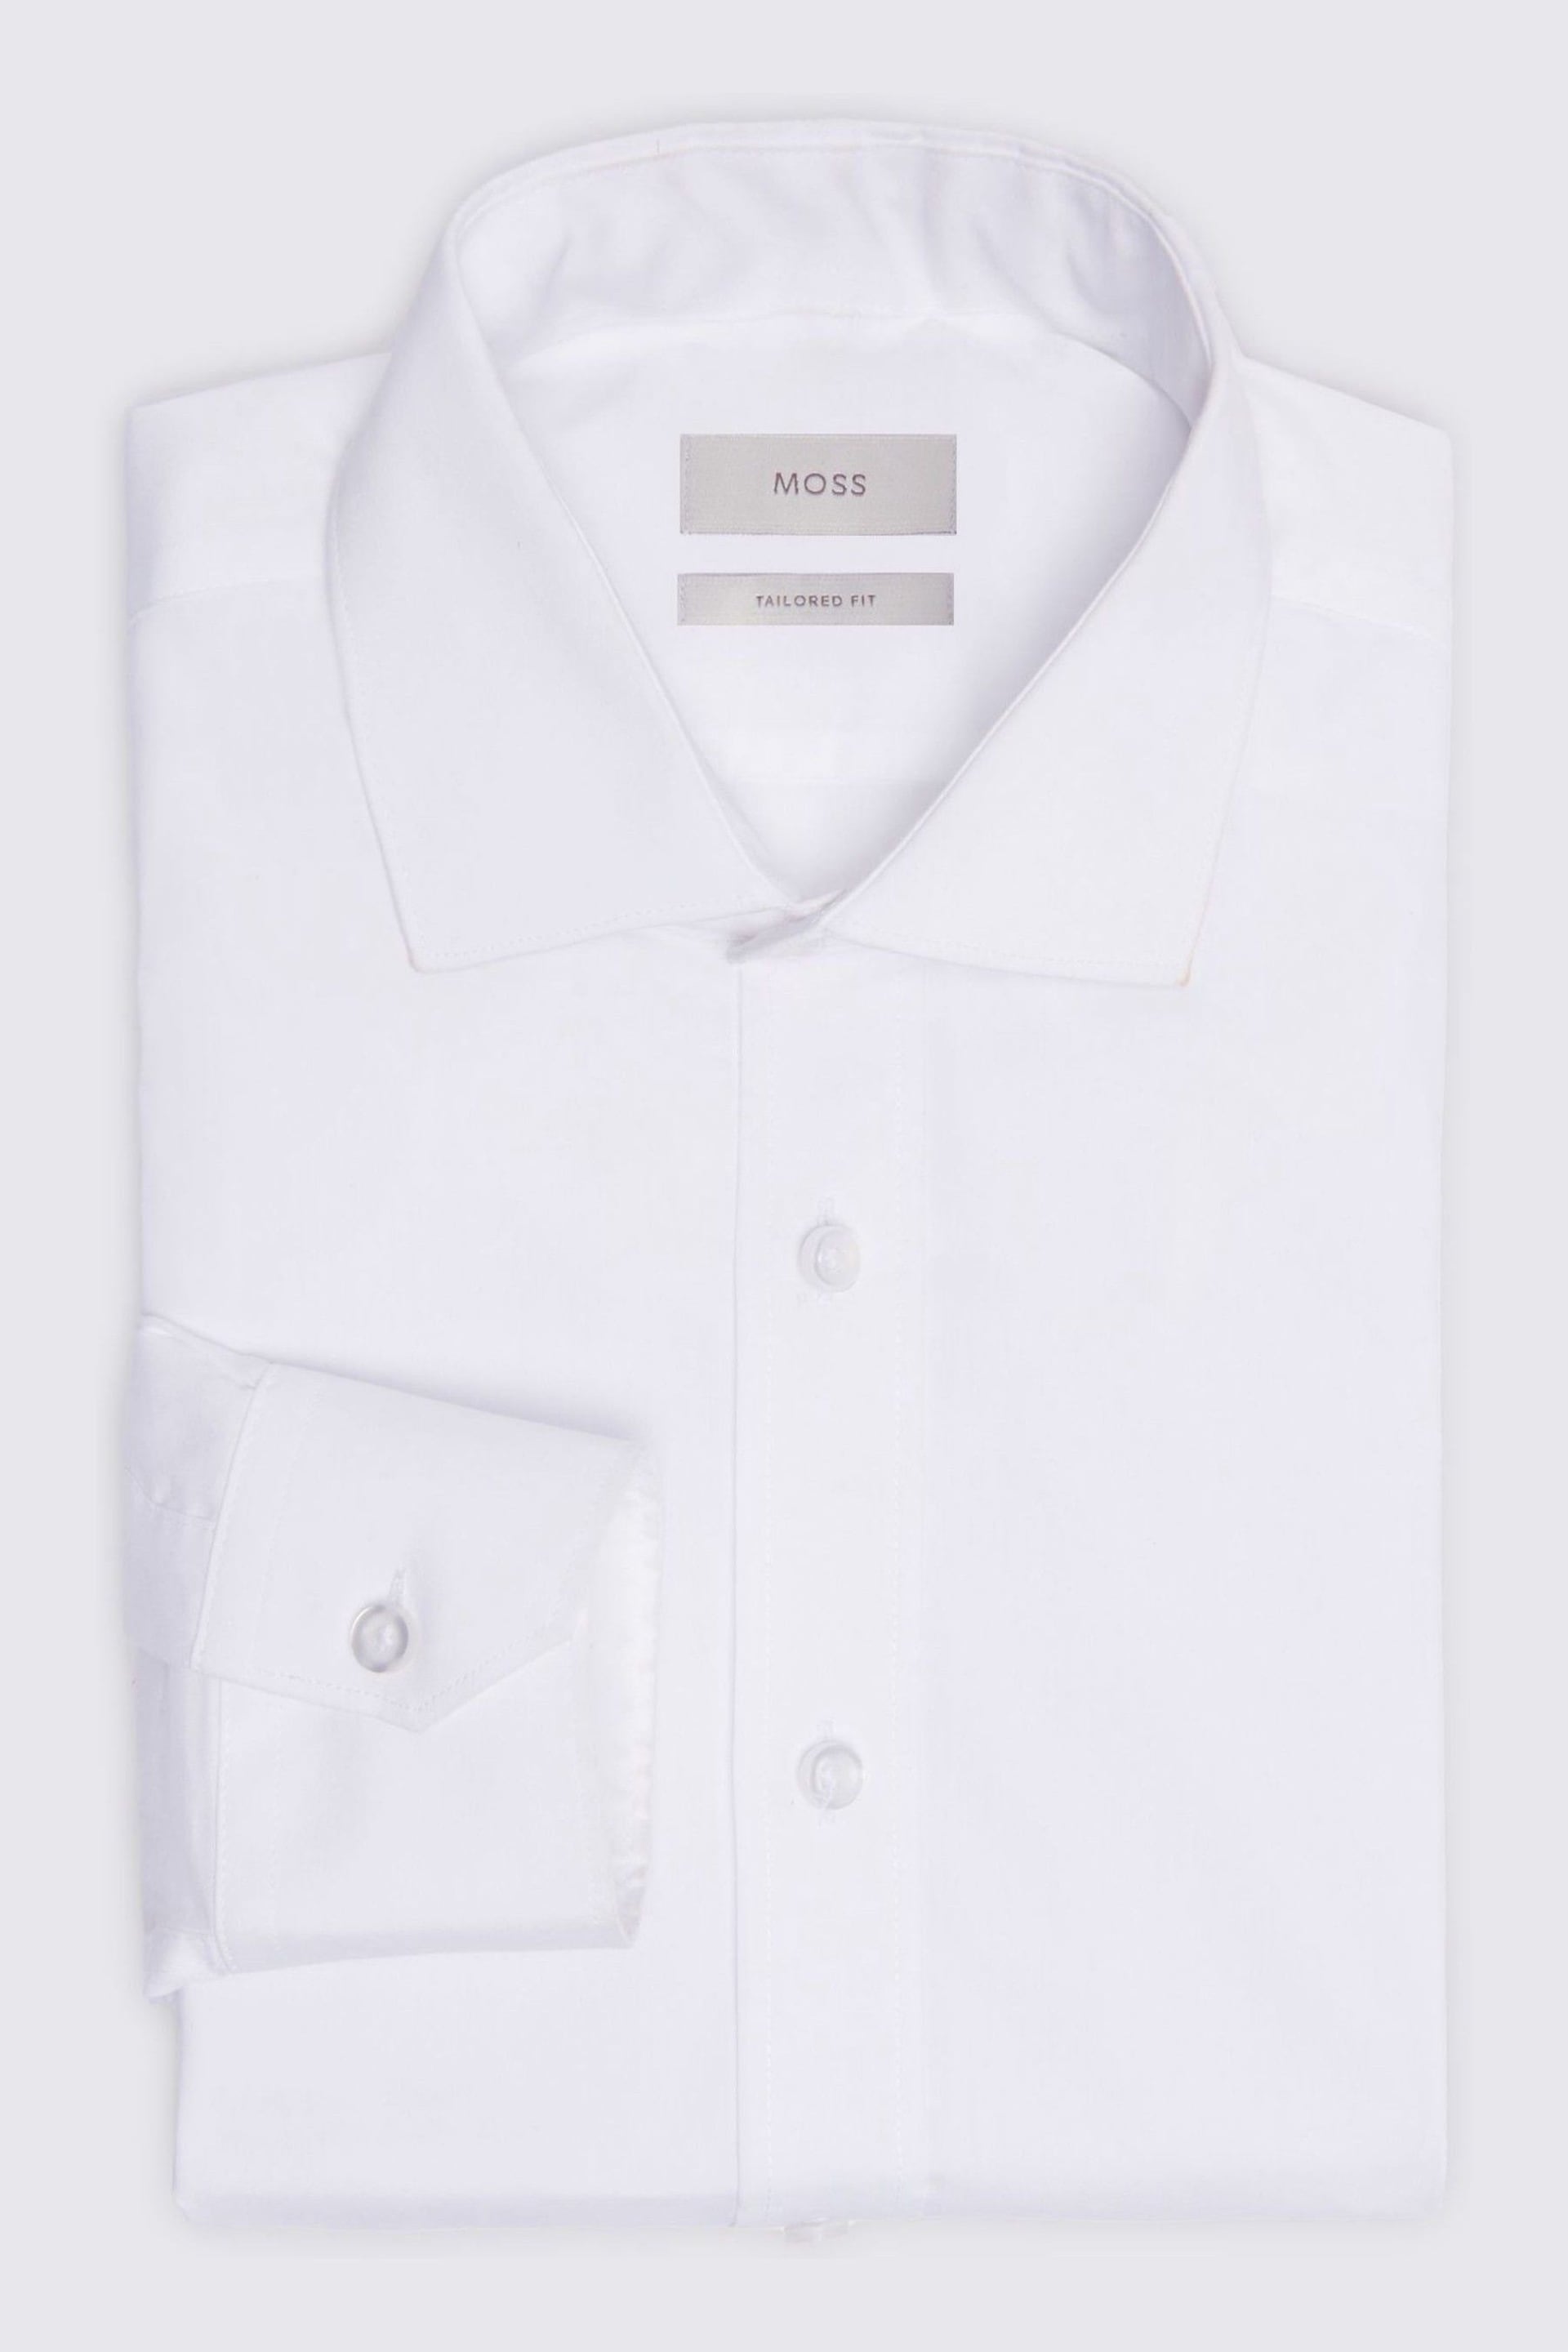 MOSS White Tailored Stretch Shirt - Image 4 of 4